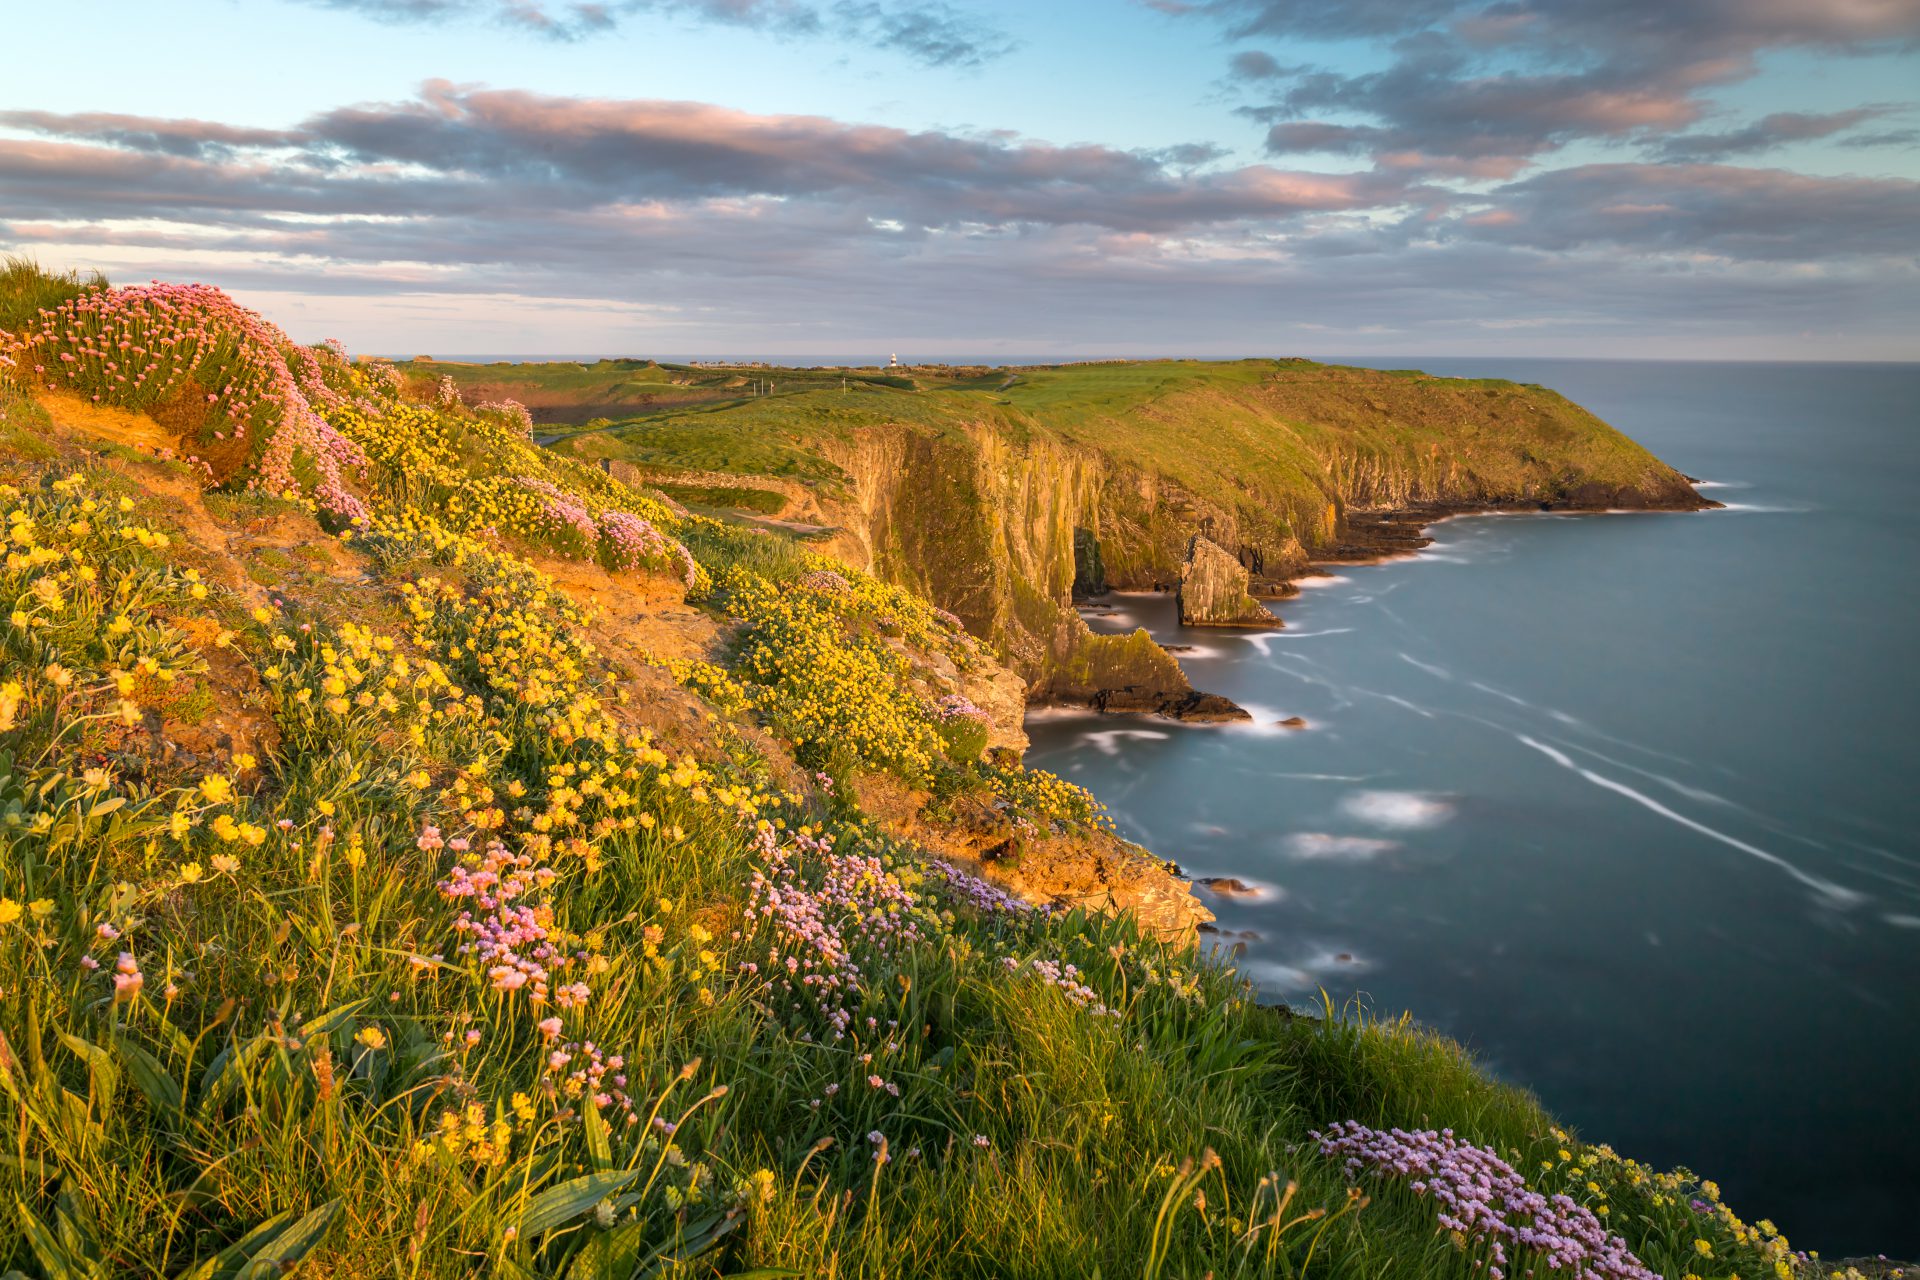 Ireland's coastline with blooming flowers and cliff drops in sunset.